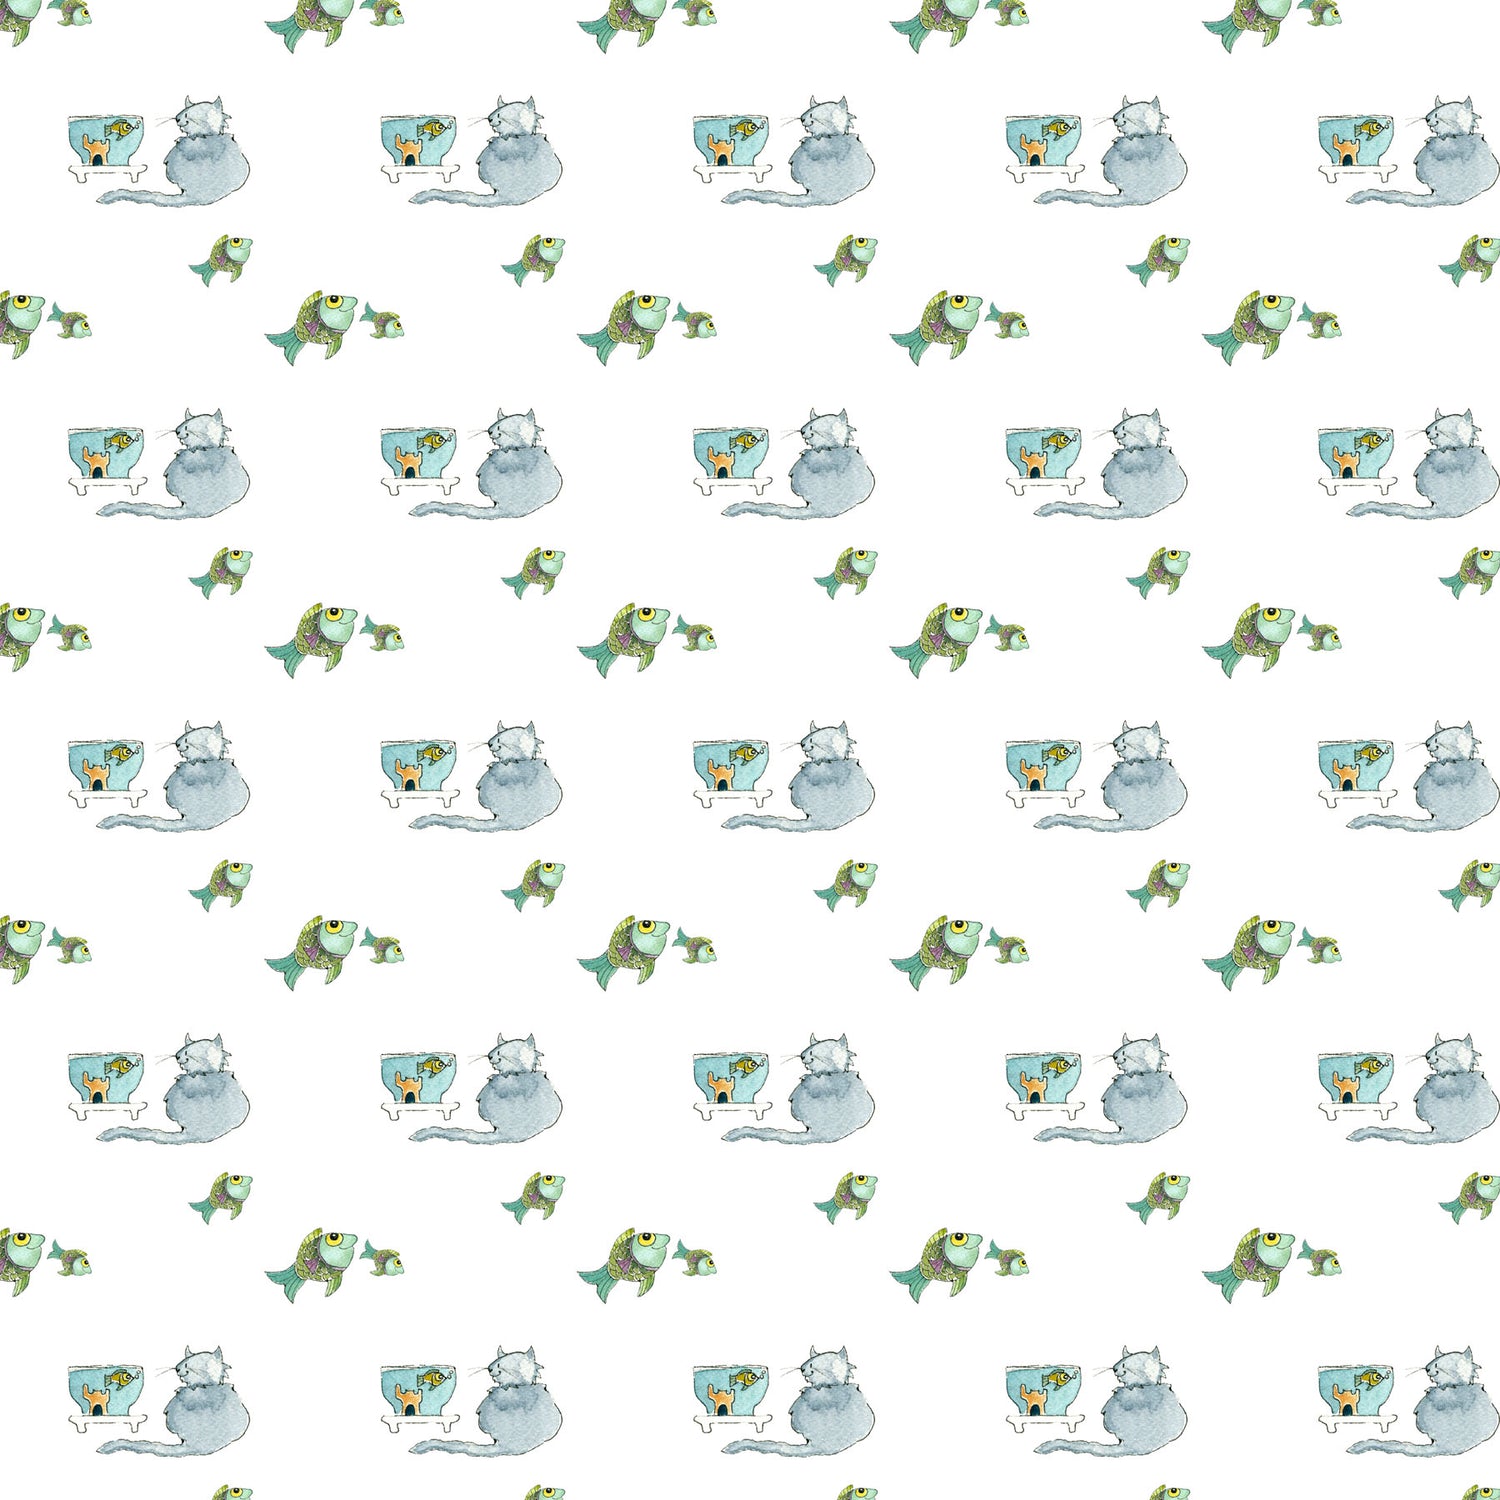 All Cat and Fish Pattern